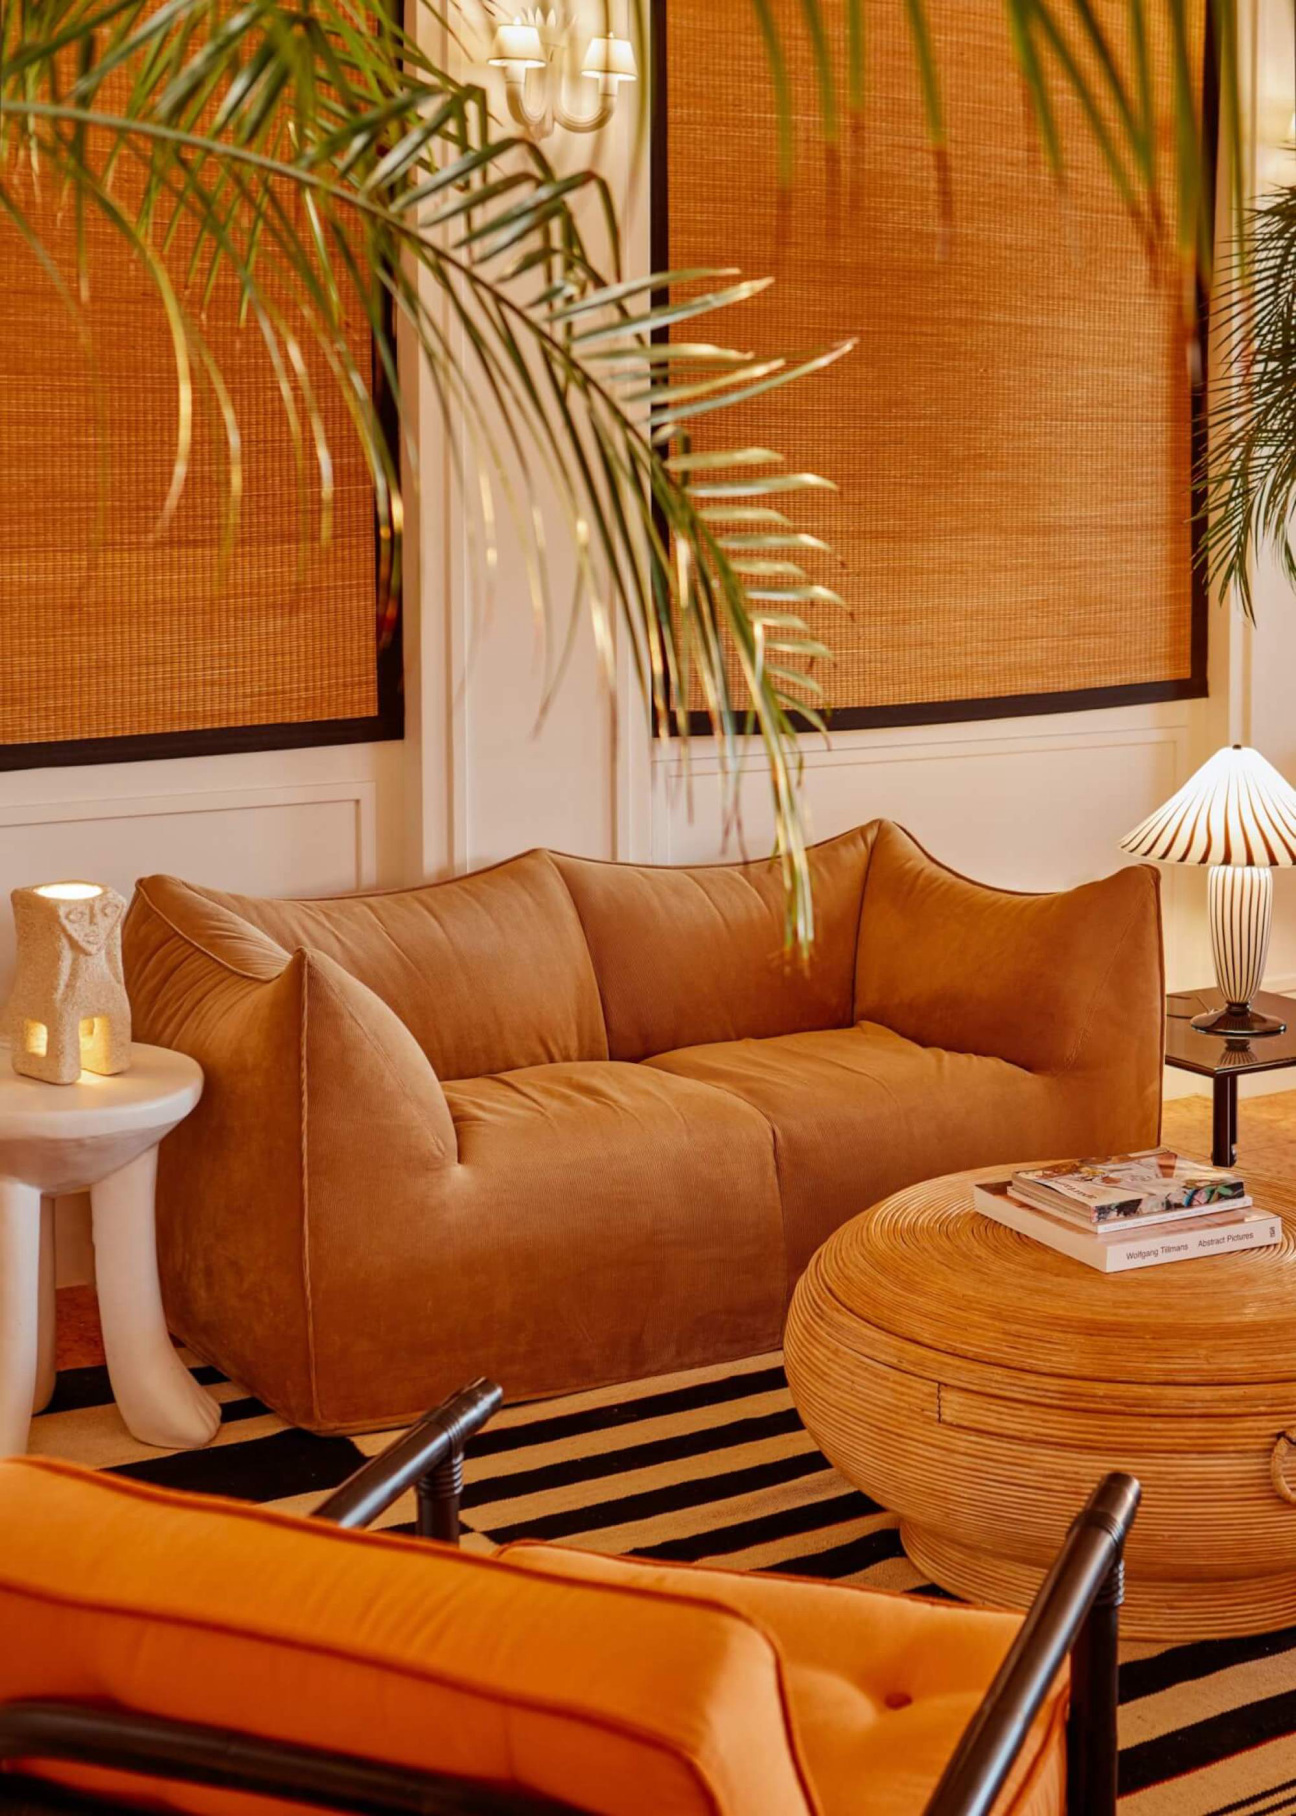 hotel space with geometric couch, palm fronds, and table with vintage magazines